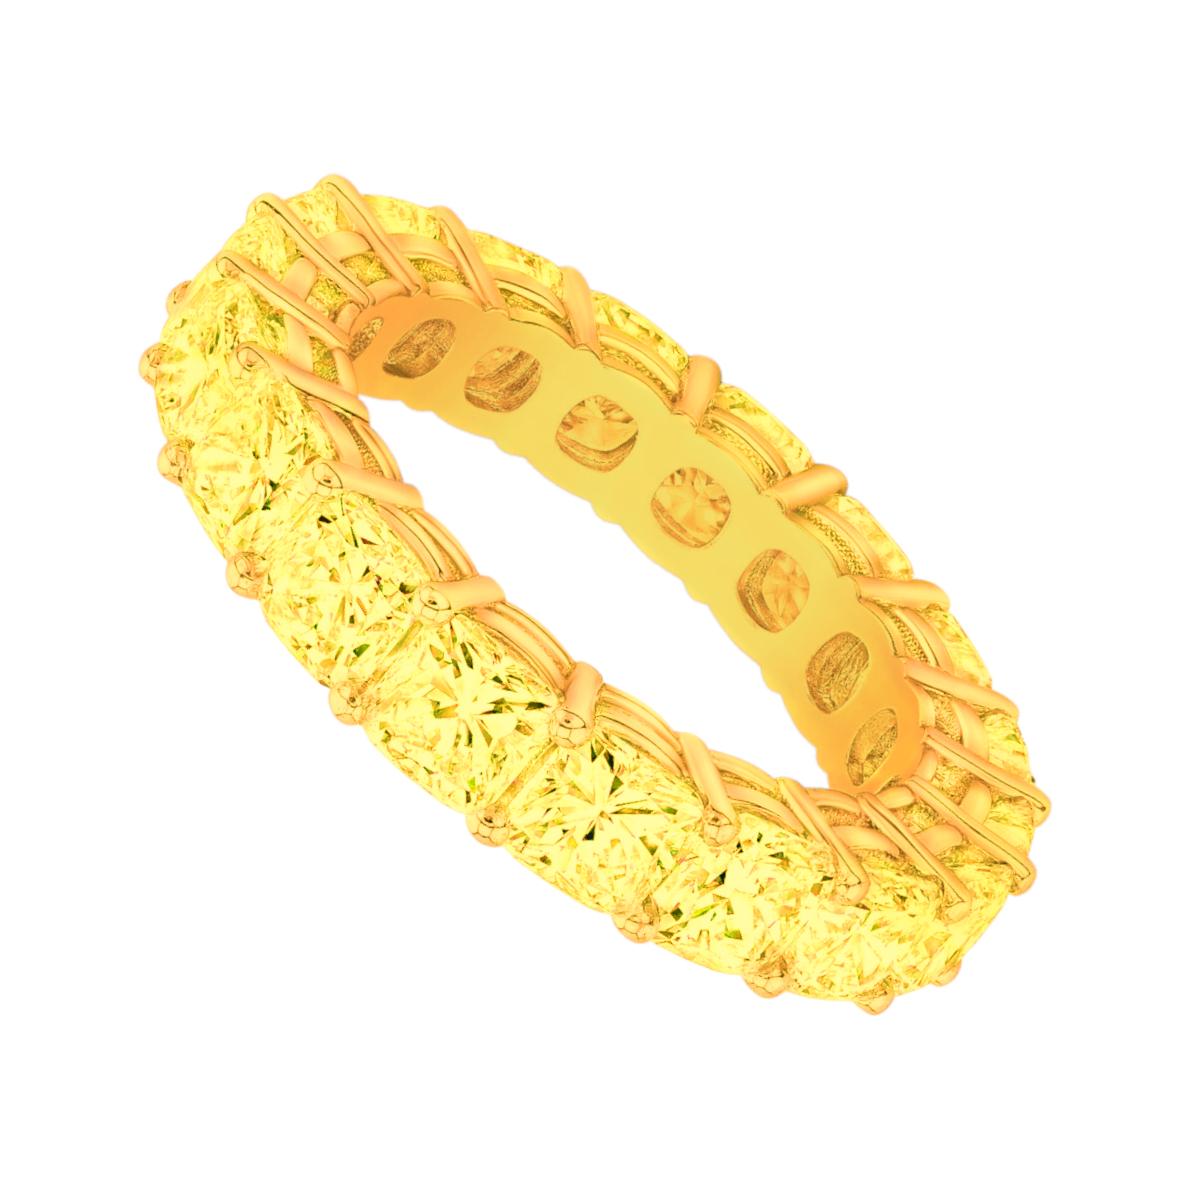 Modern 6 Carat Fancy Yellow Eternity Band Ring Set in 18 Carat Yellow Gold For Sale